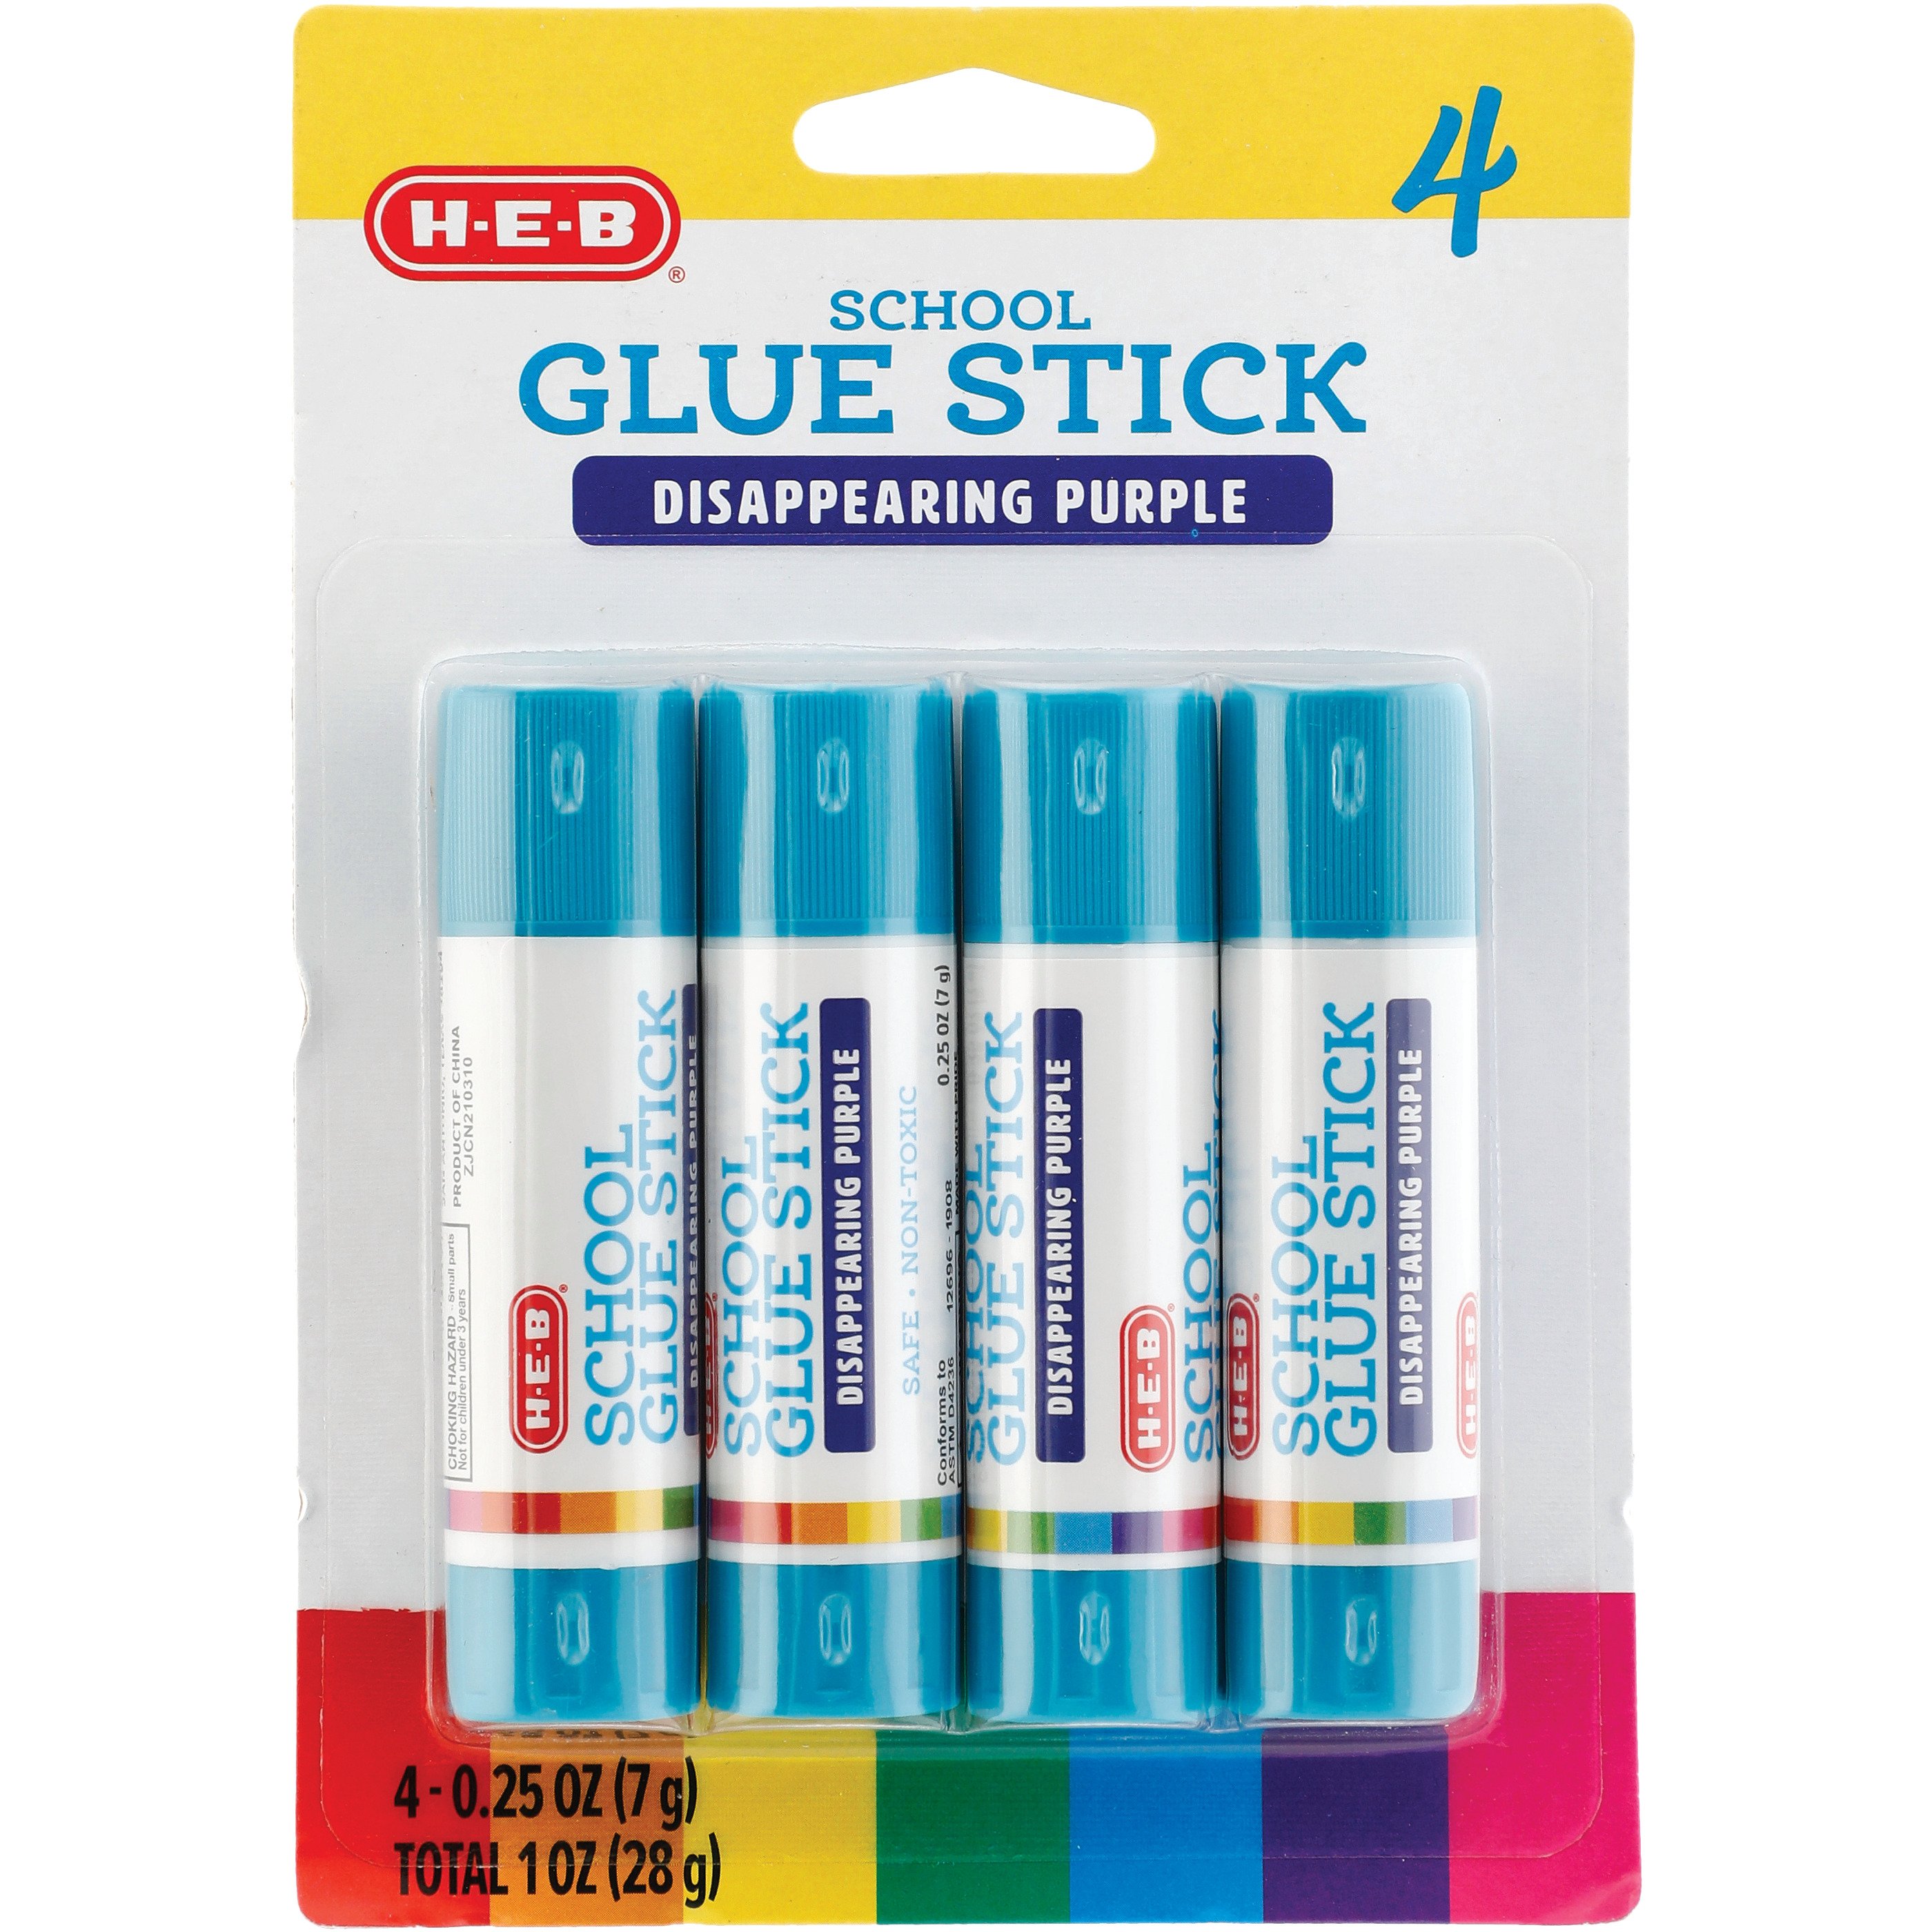 Up & Up GIANT Disappearing Purple Glue Stick 12 PACK Washable New